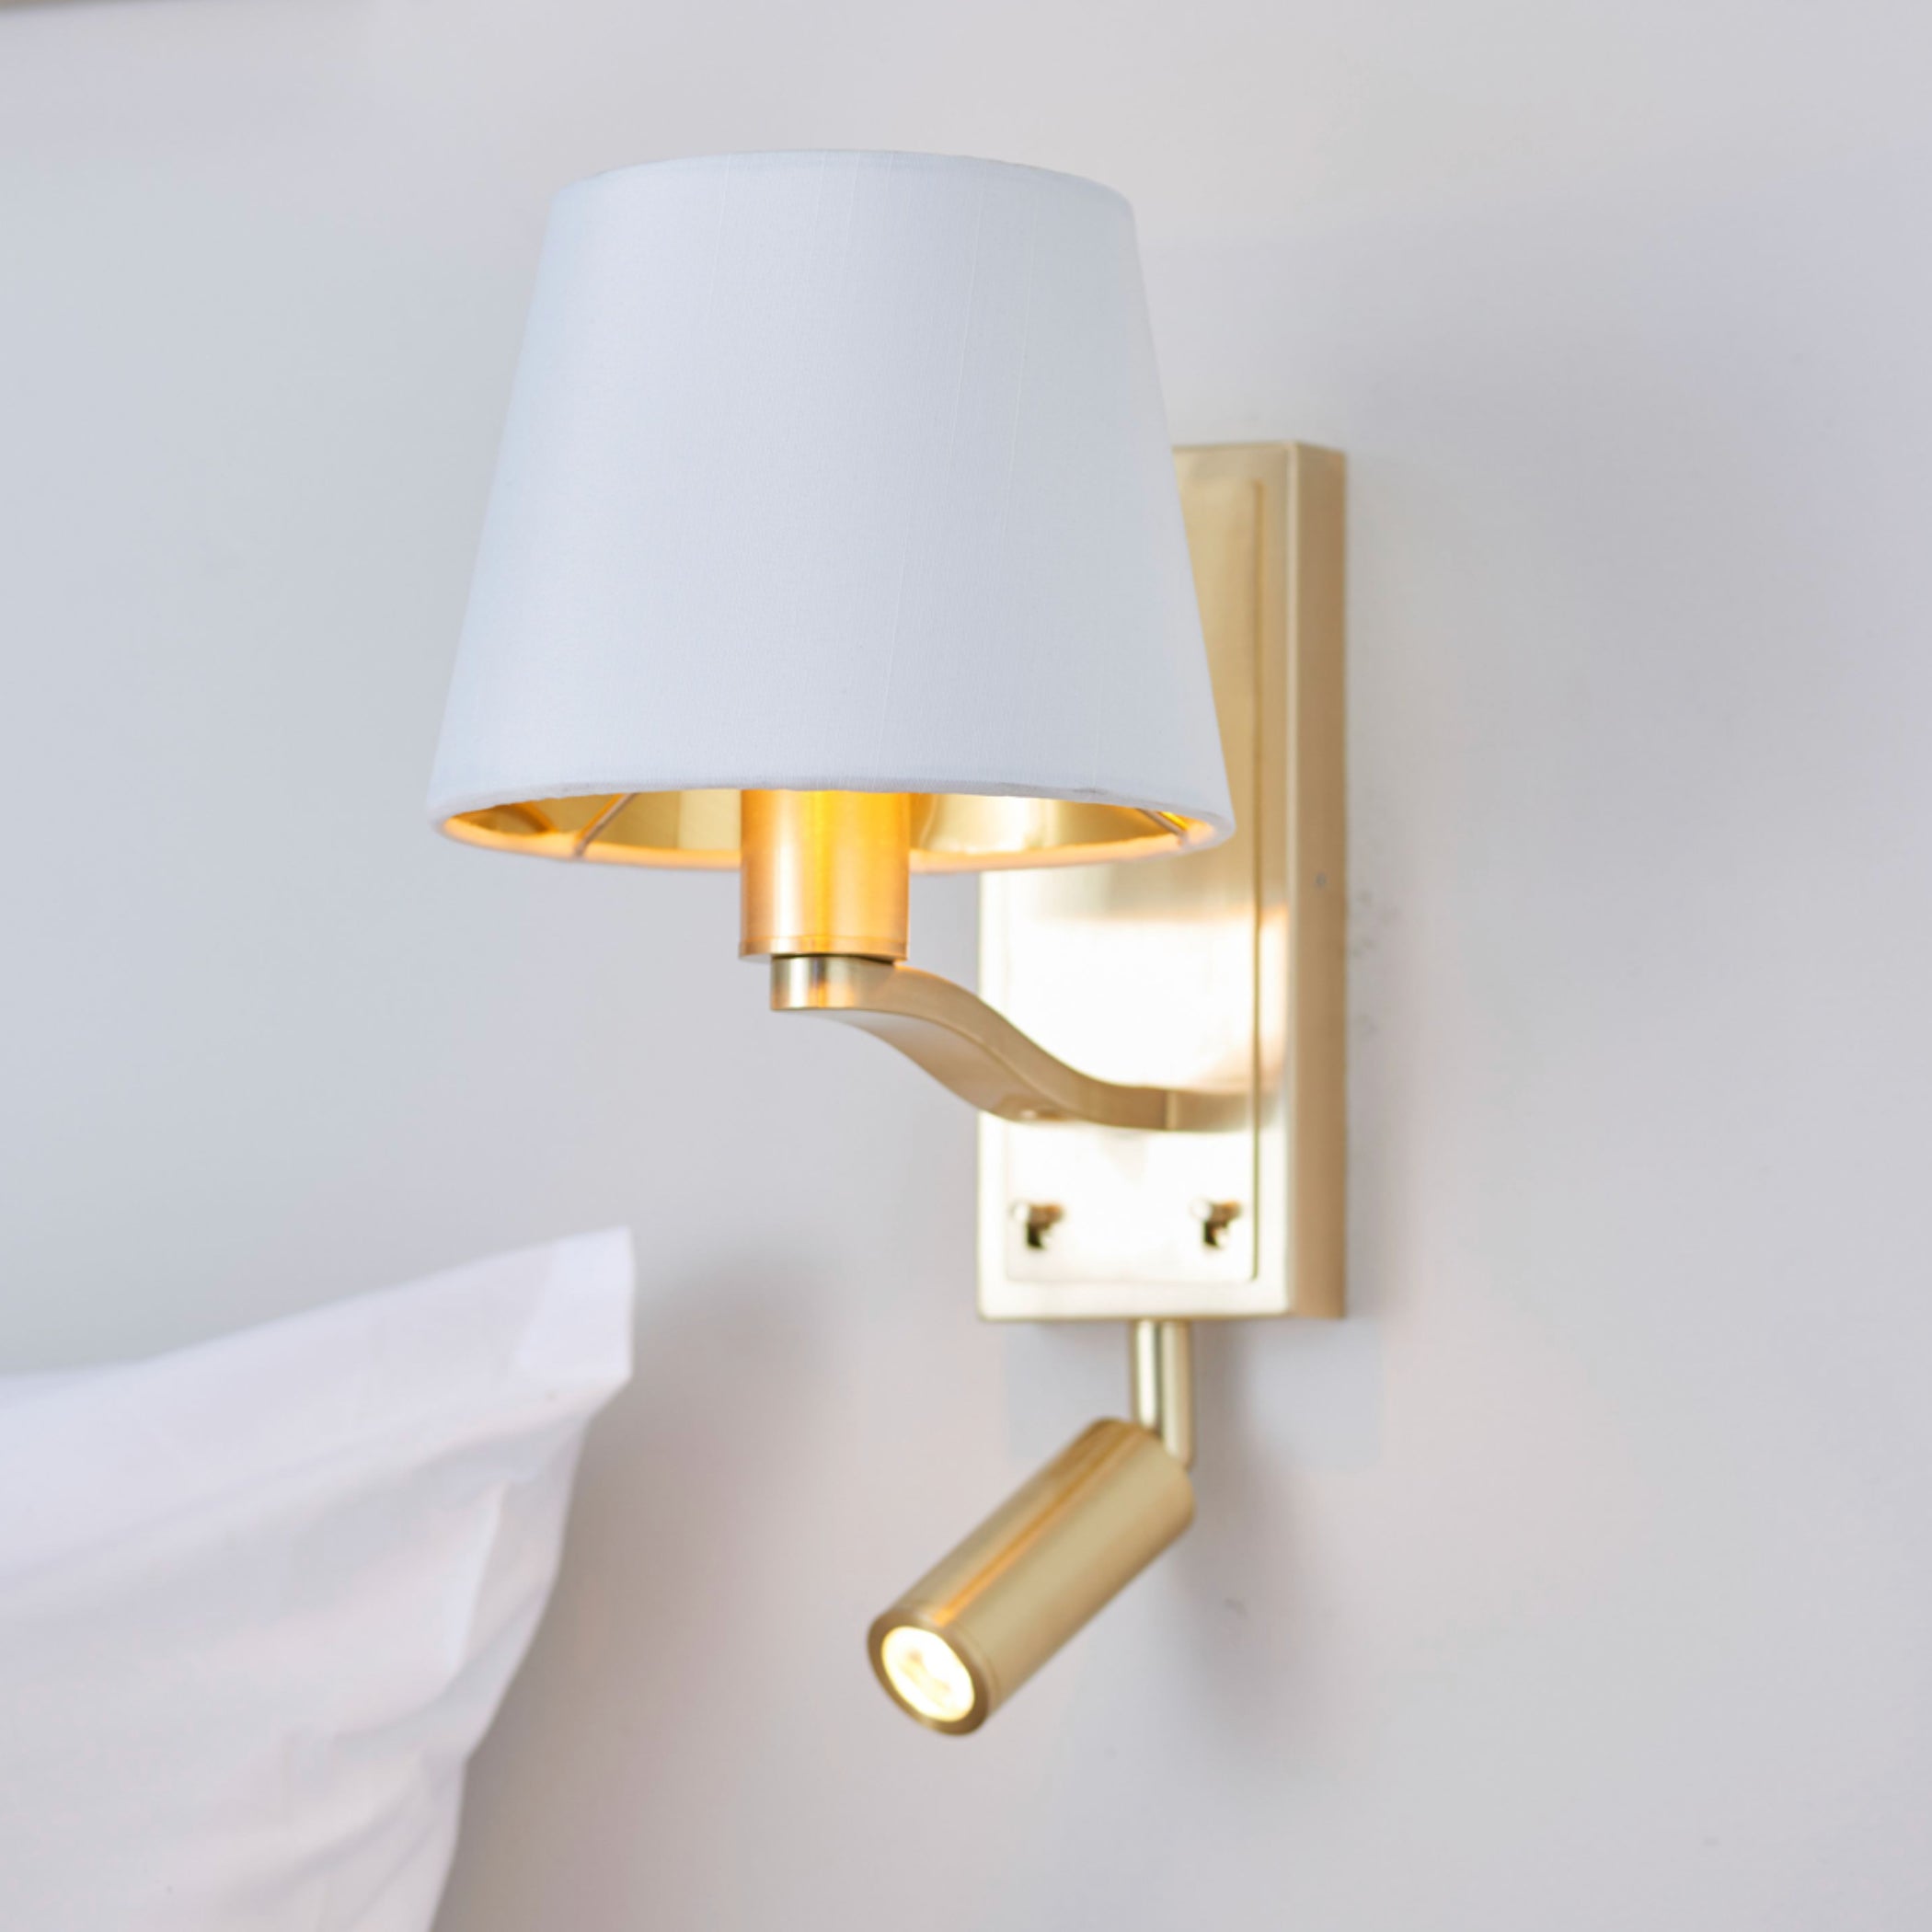 Brushed Satin Gold Wall Light with Shade & adjustable LED reading light 4